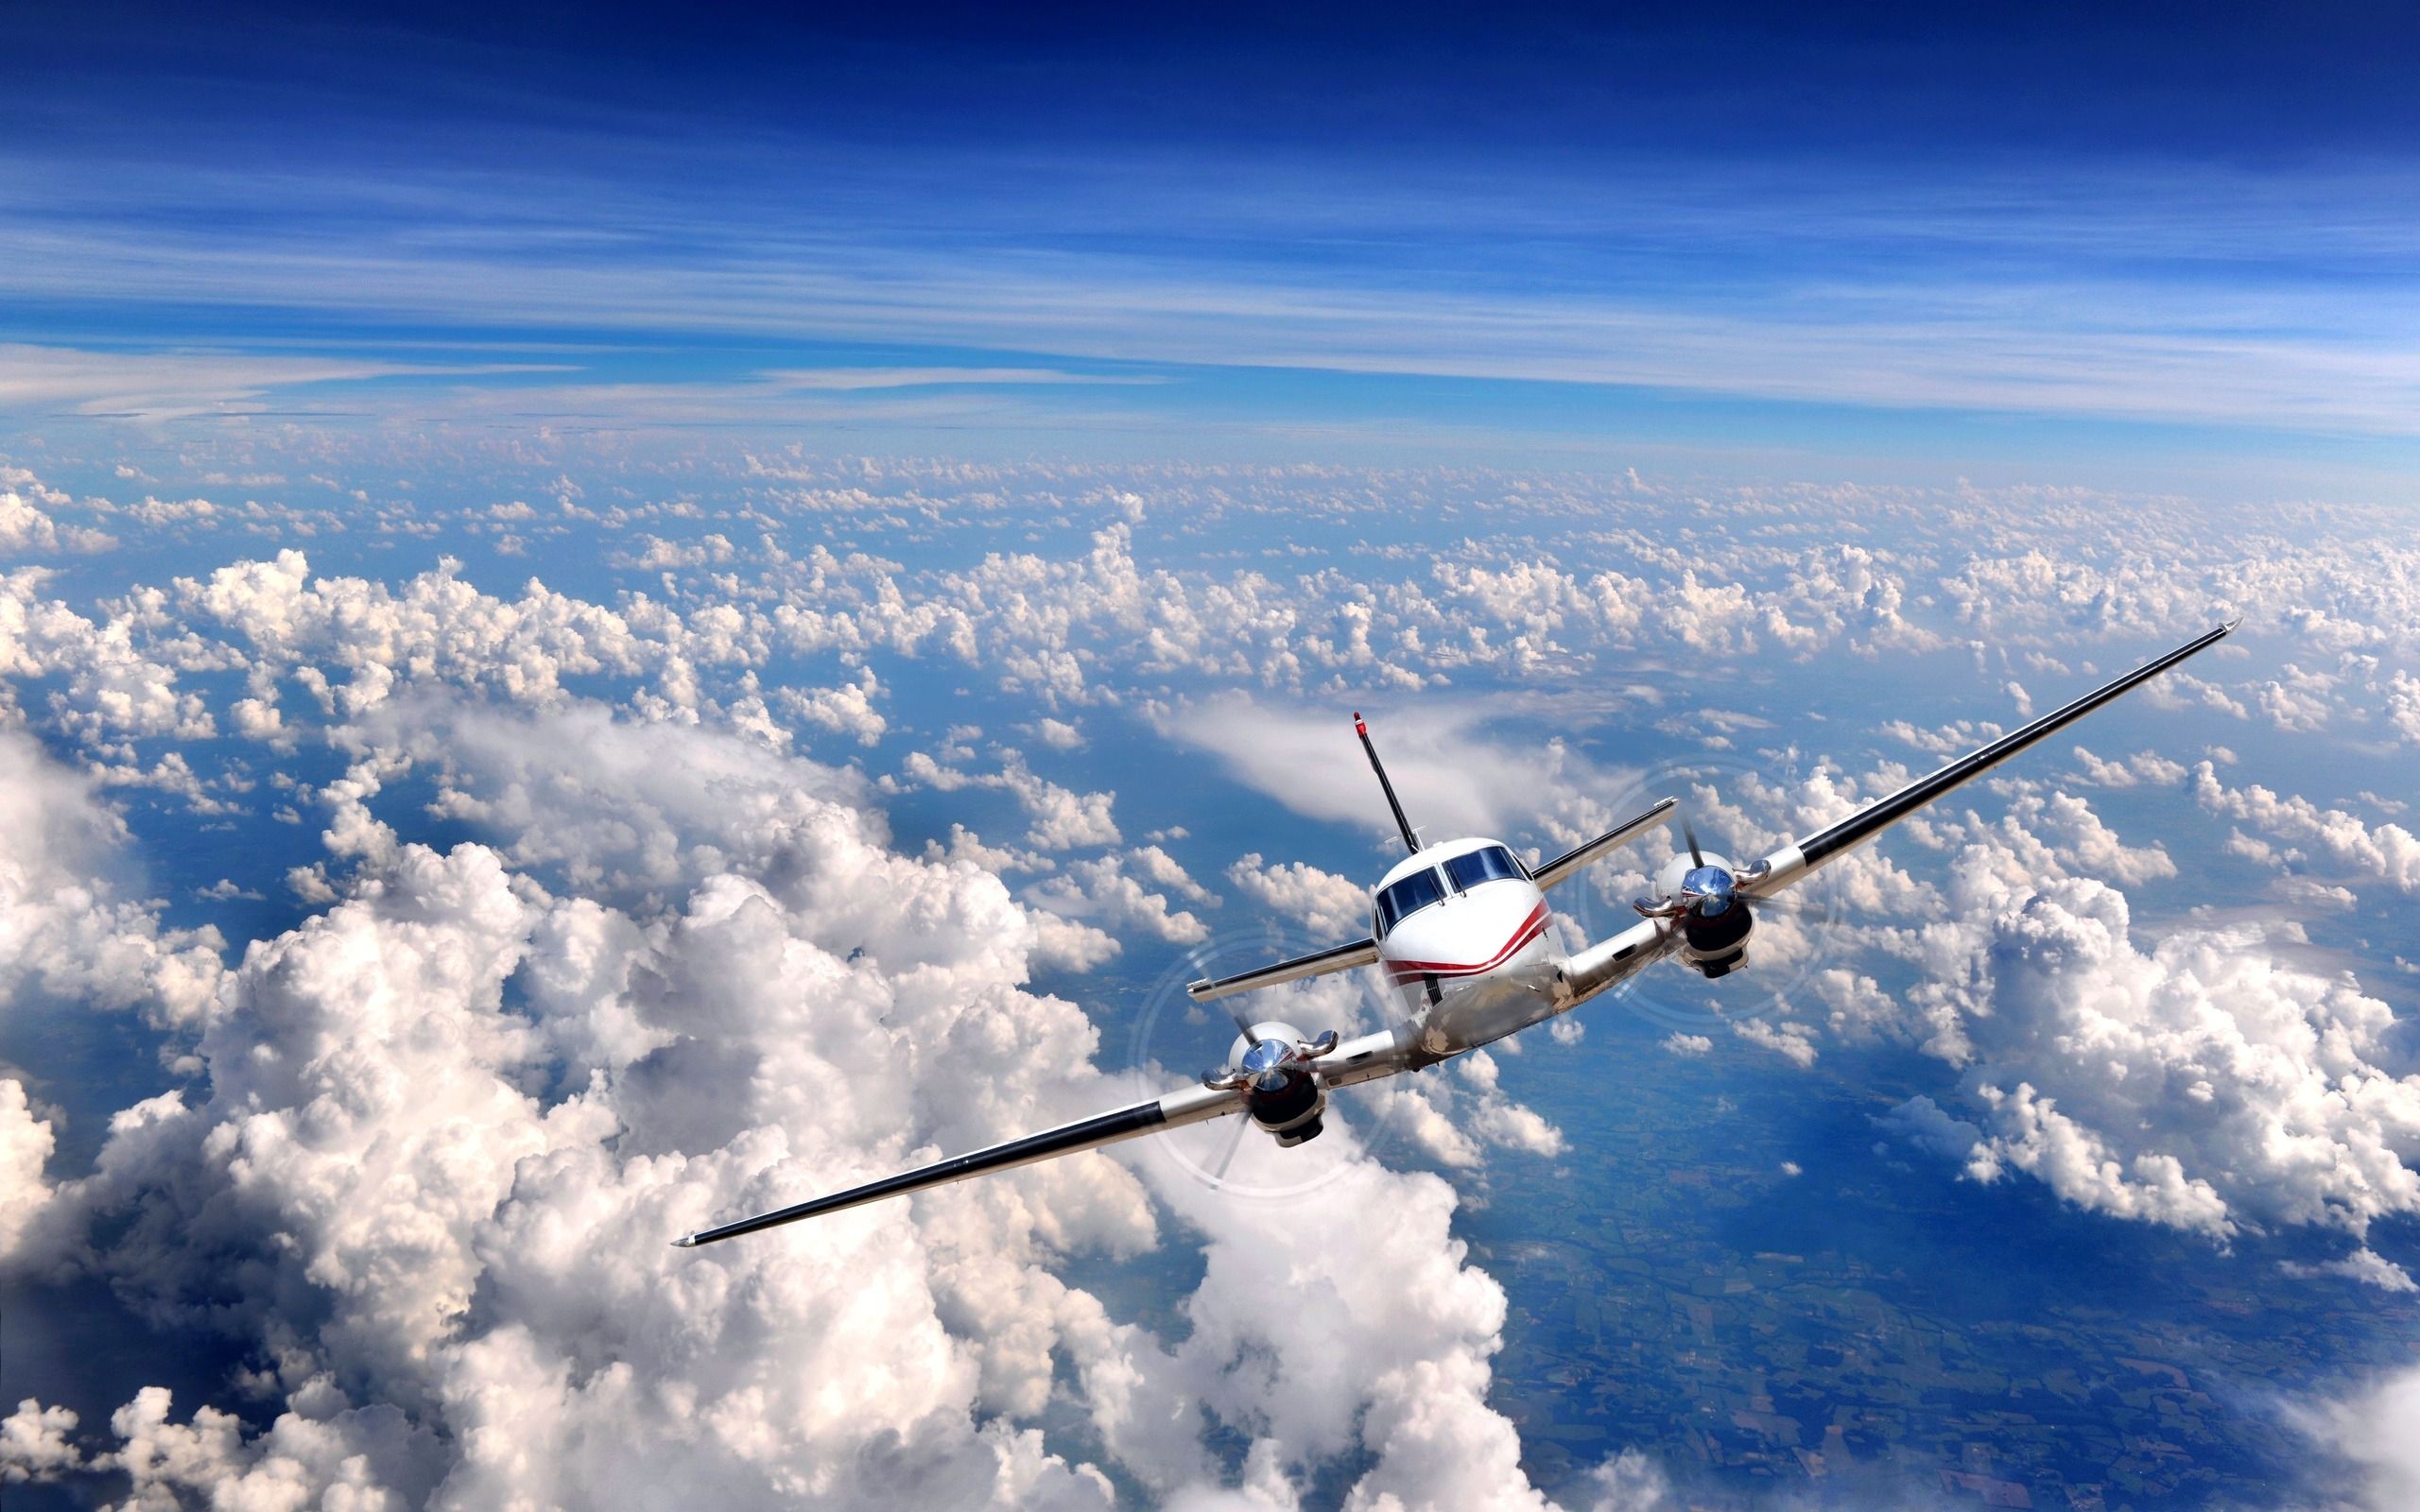 Plane among the clouds wallpapers and images - wallpapers ...